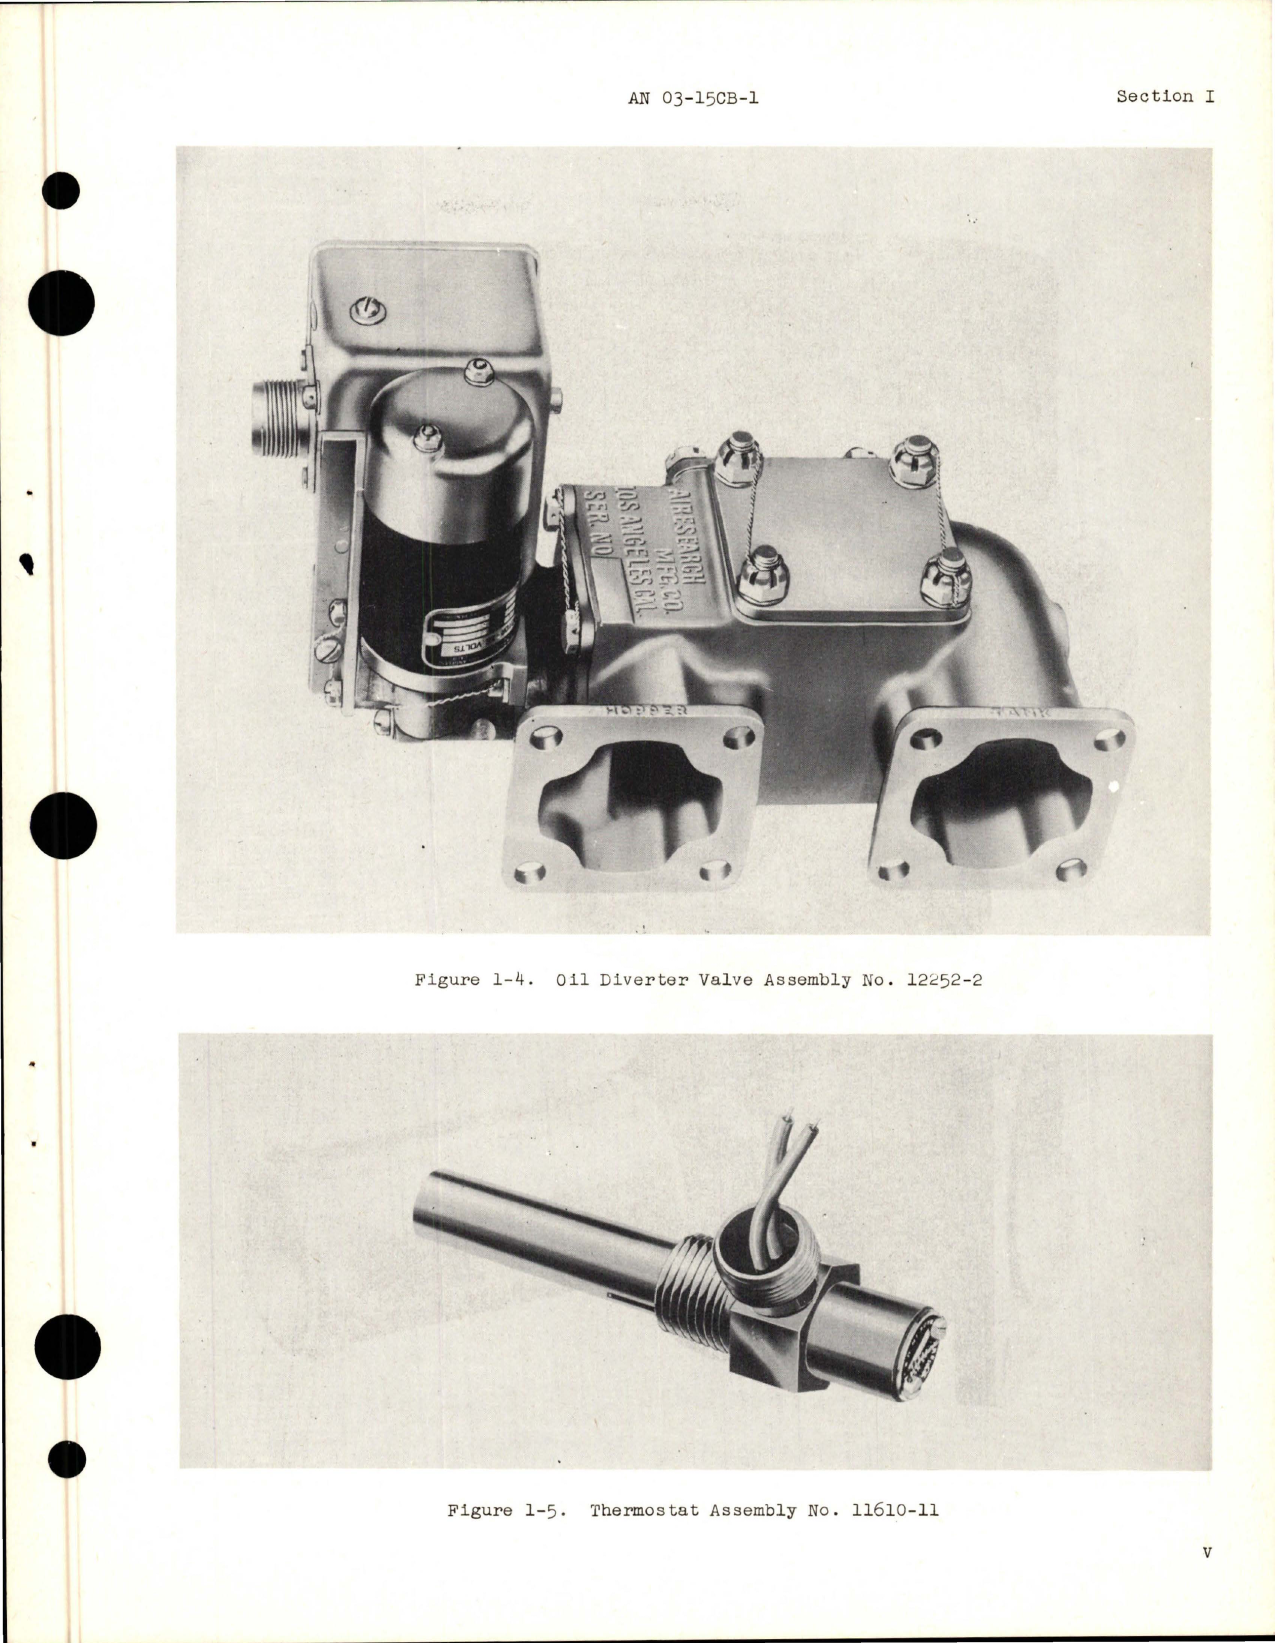 Sample page 7 from AirCorps Library document: Operation, Service, Overhaul Instructions for Oil Diverter Valve Assembly - Part 12211-2, 12252-2, Floating Control Thermostat Assembly - Part 11607, Thermostat Assembly - Parts 11608-1, 11610-11